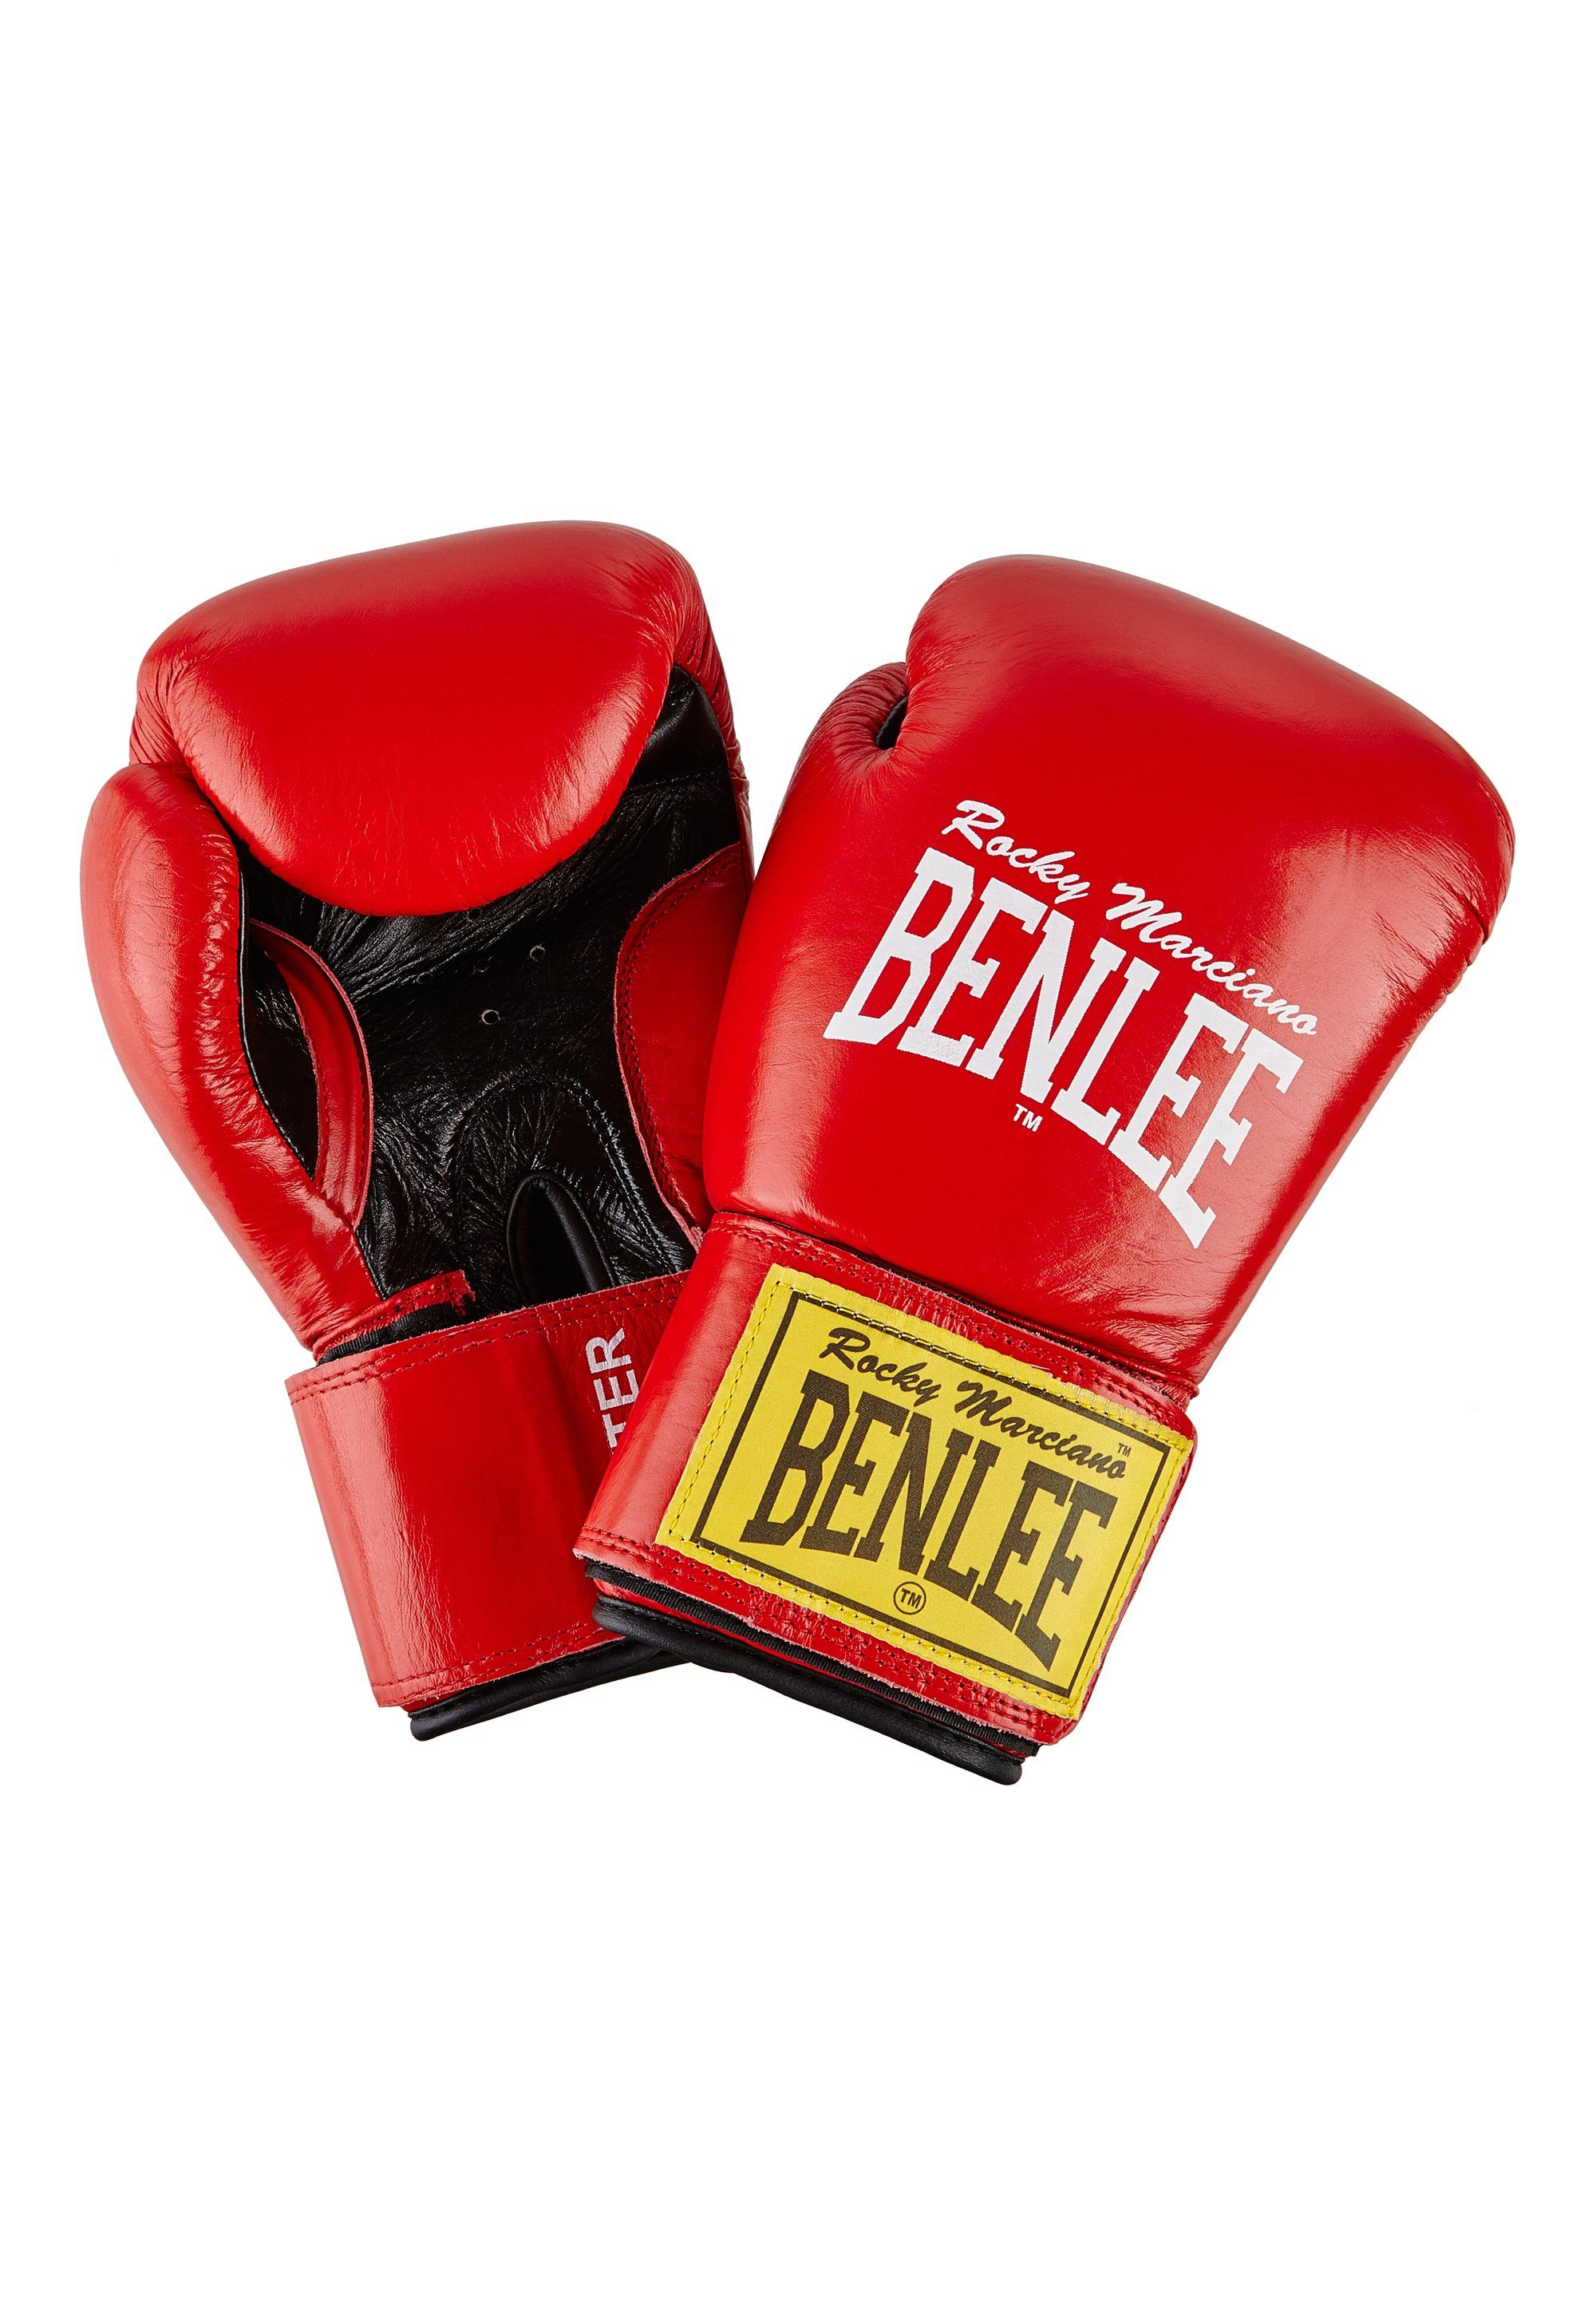 Benlee Rocky Marciano FIGHTER Boxhandschuhe Red/Black